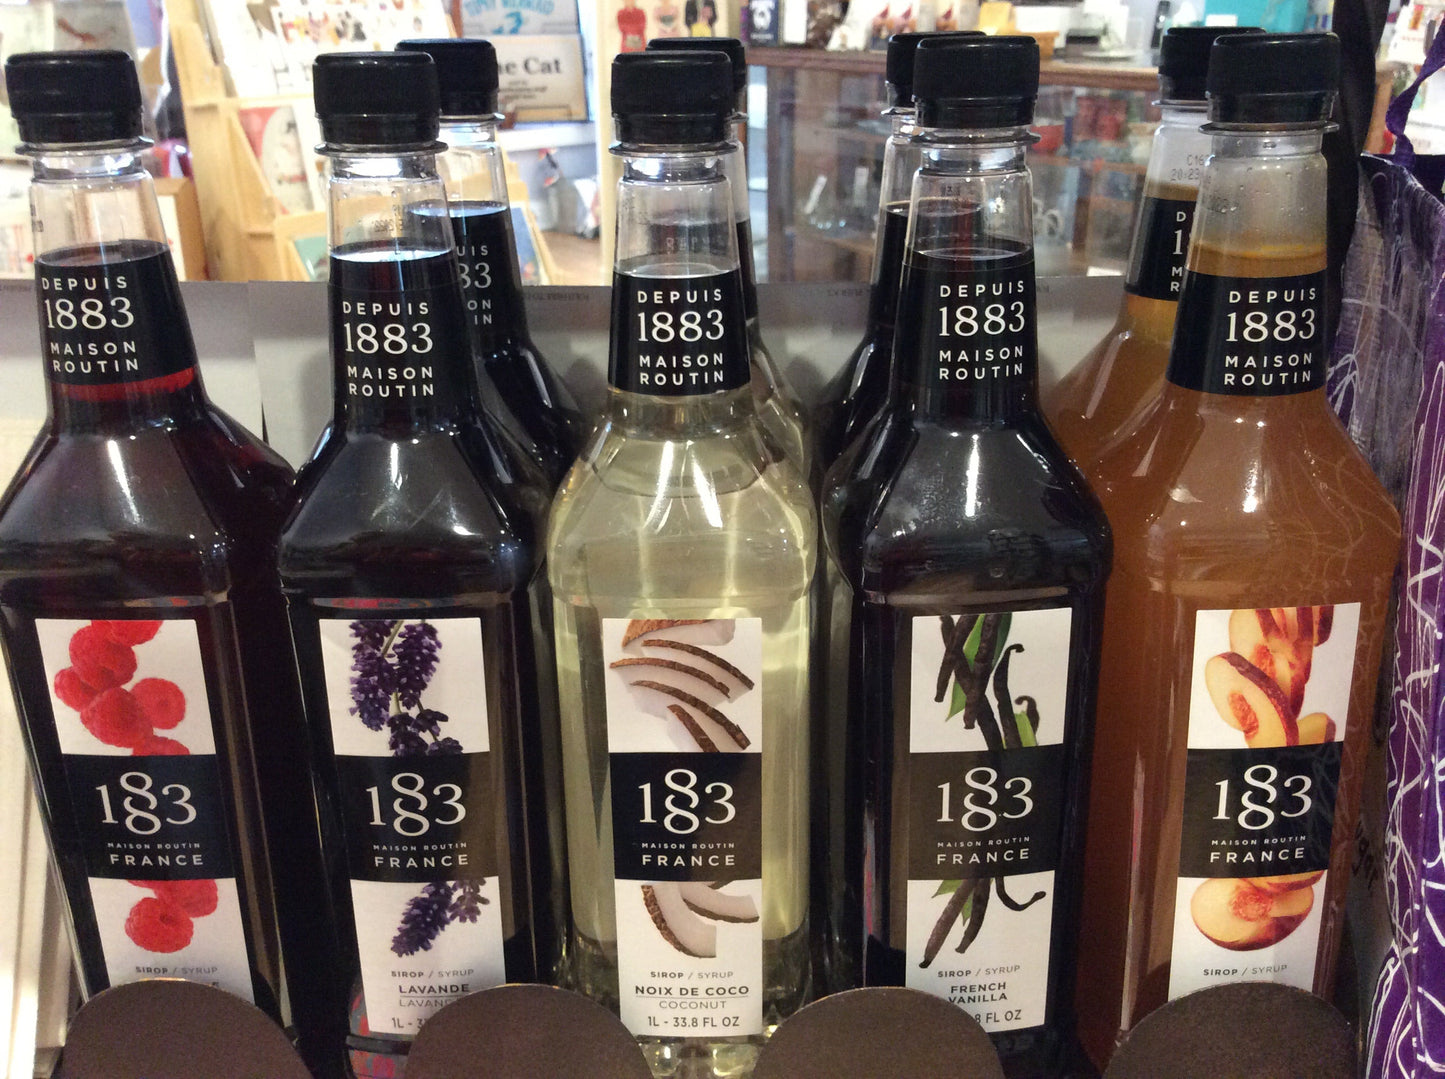 1883 Maison  Syrup (1L) In Store Only